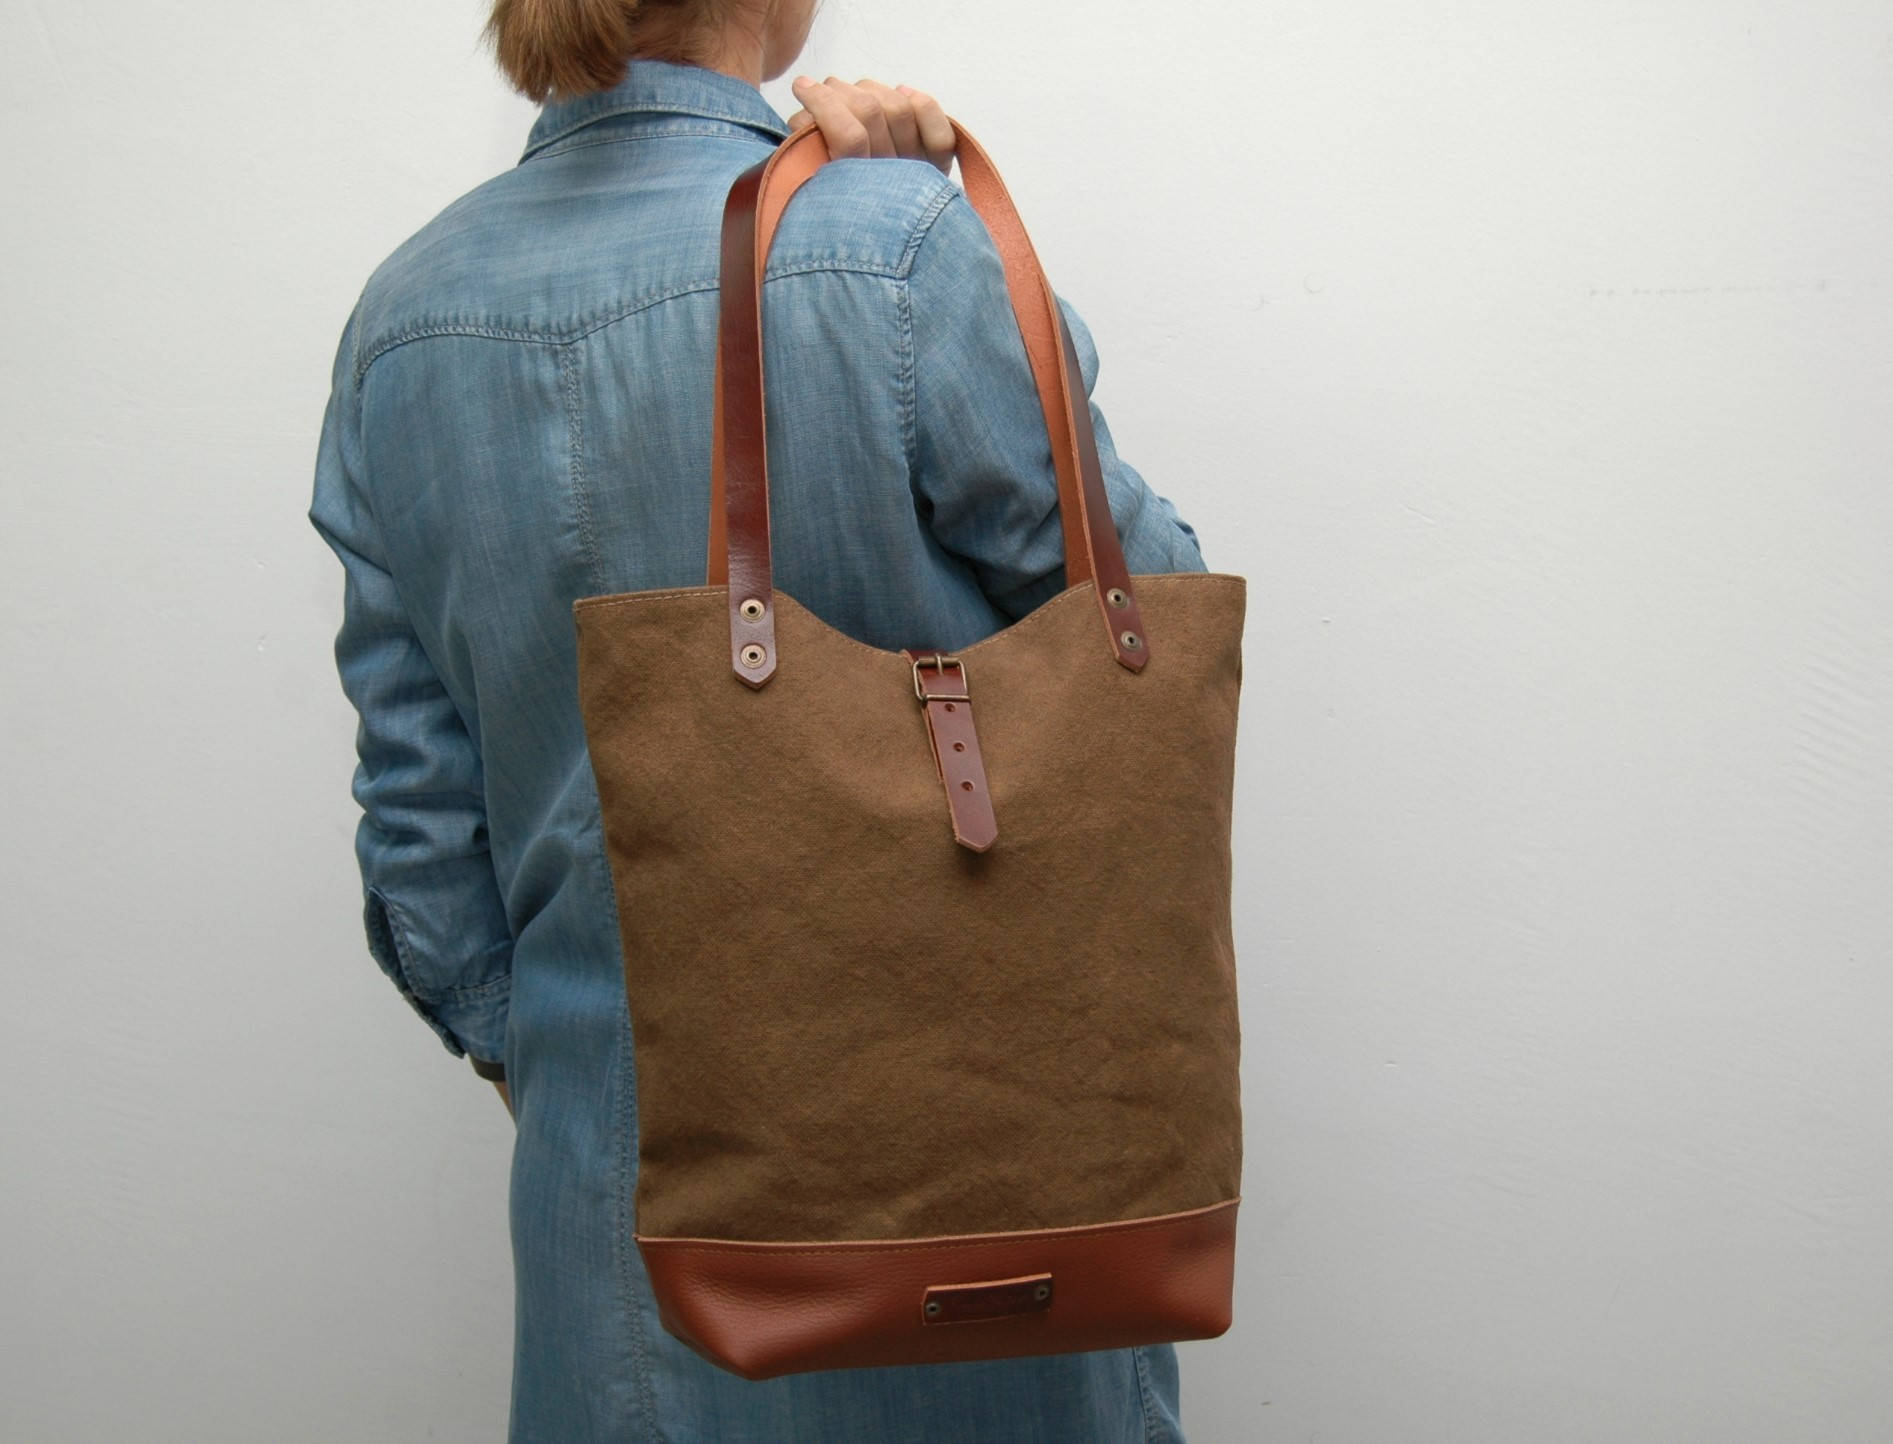 Tote bag waxed canvas brown tobacco color leather bottom